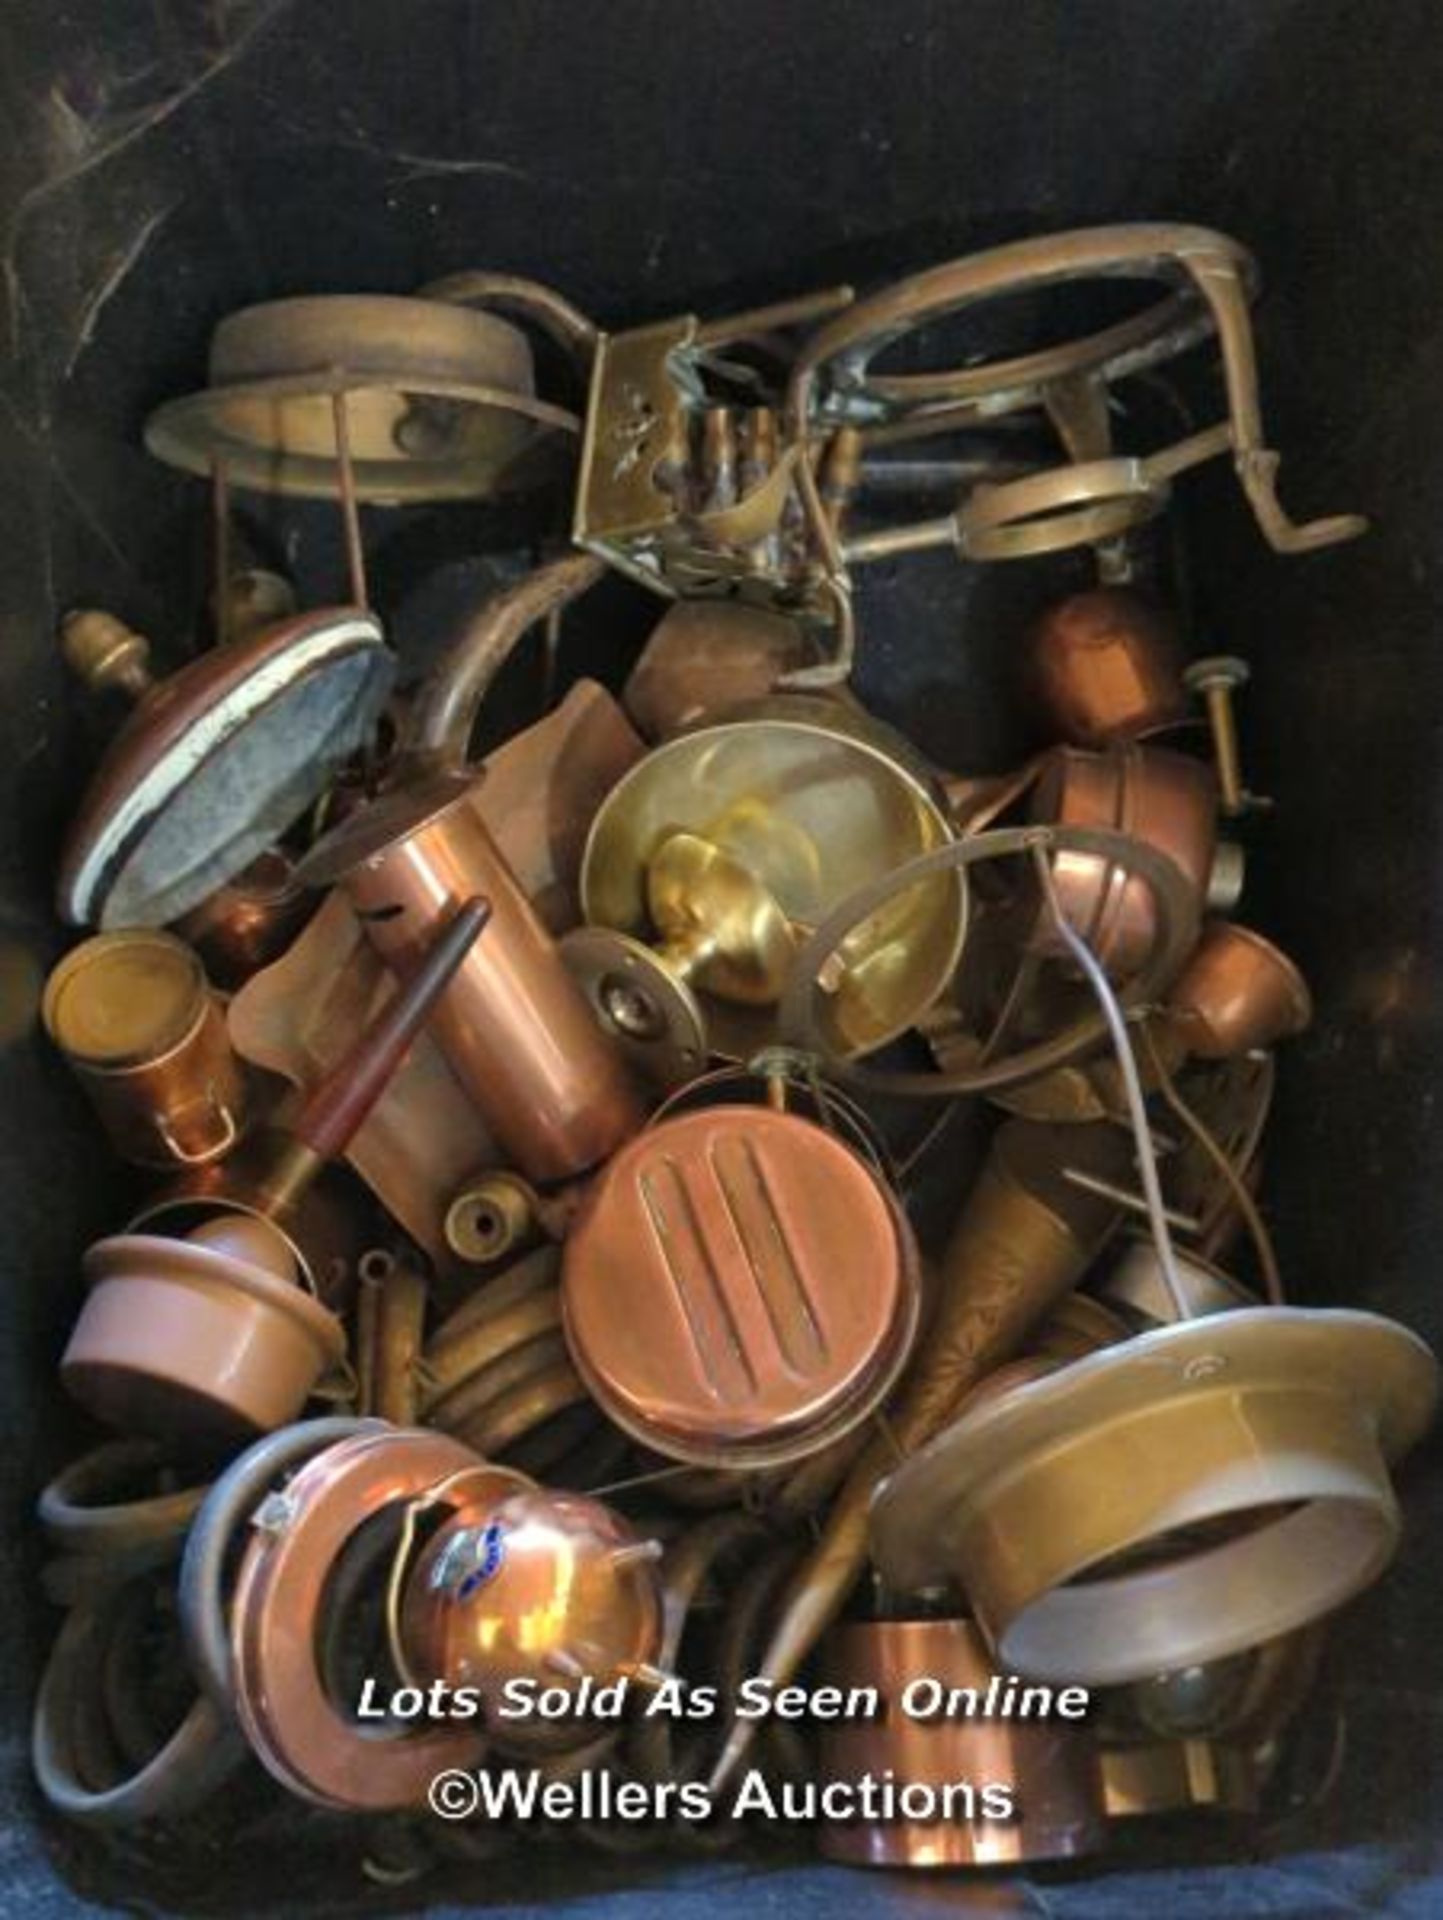 *BOX OF COPPERWARE AND BRASSWARE / ALL LOTS ARE LOCATED AT AUTHENTIC RECLAMATION TN5 7EF